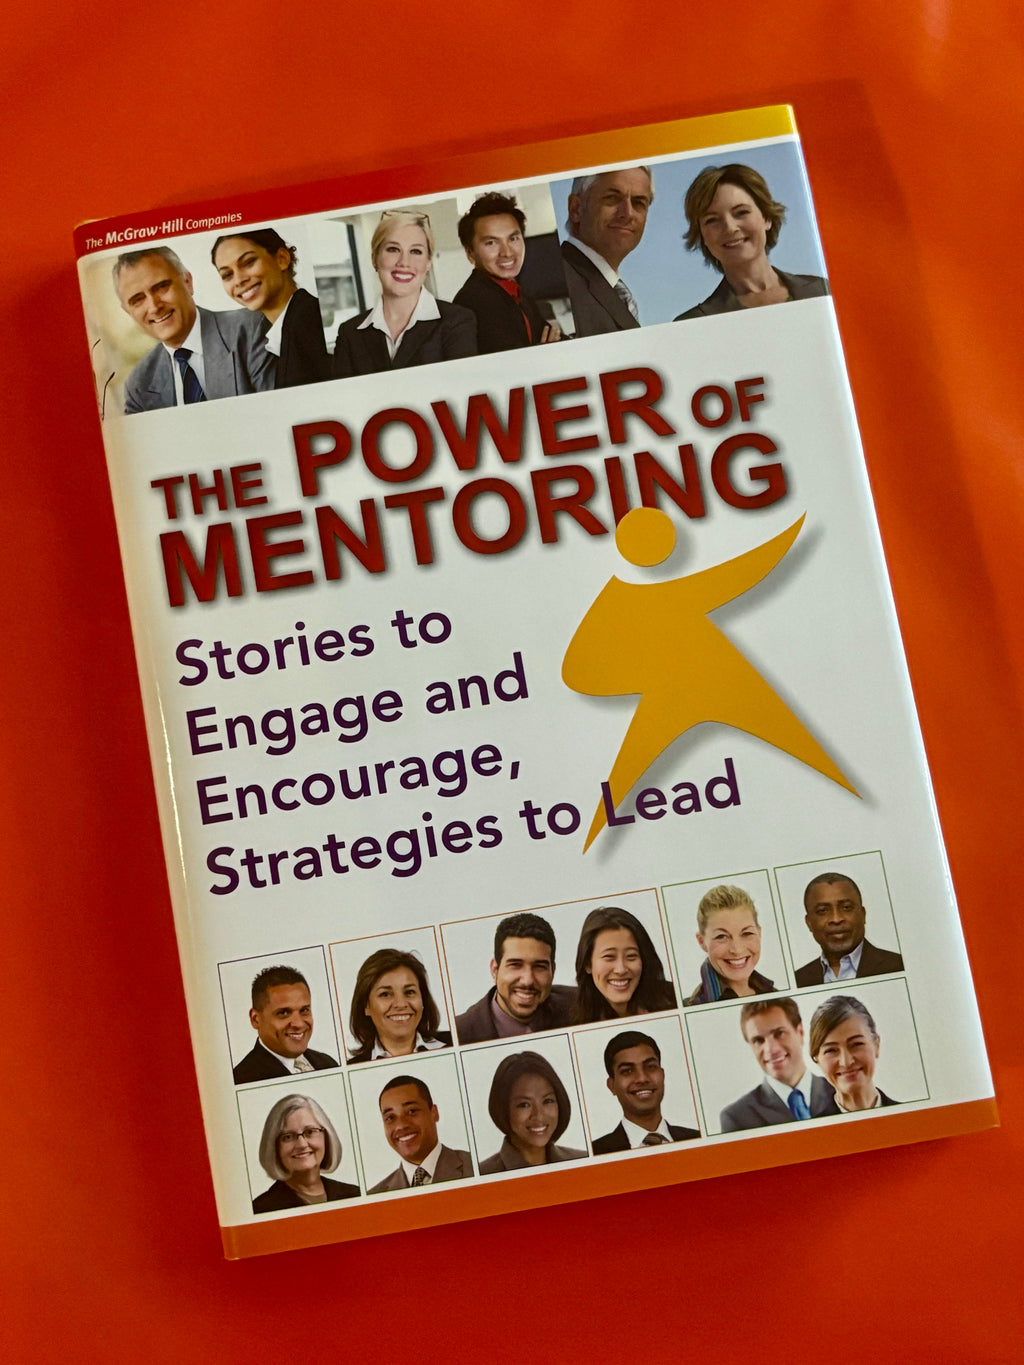 The Power of Mentoring: Stories to Engage and Encourage, Strategies to Lead- By McGraw-Hill